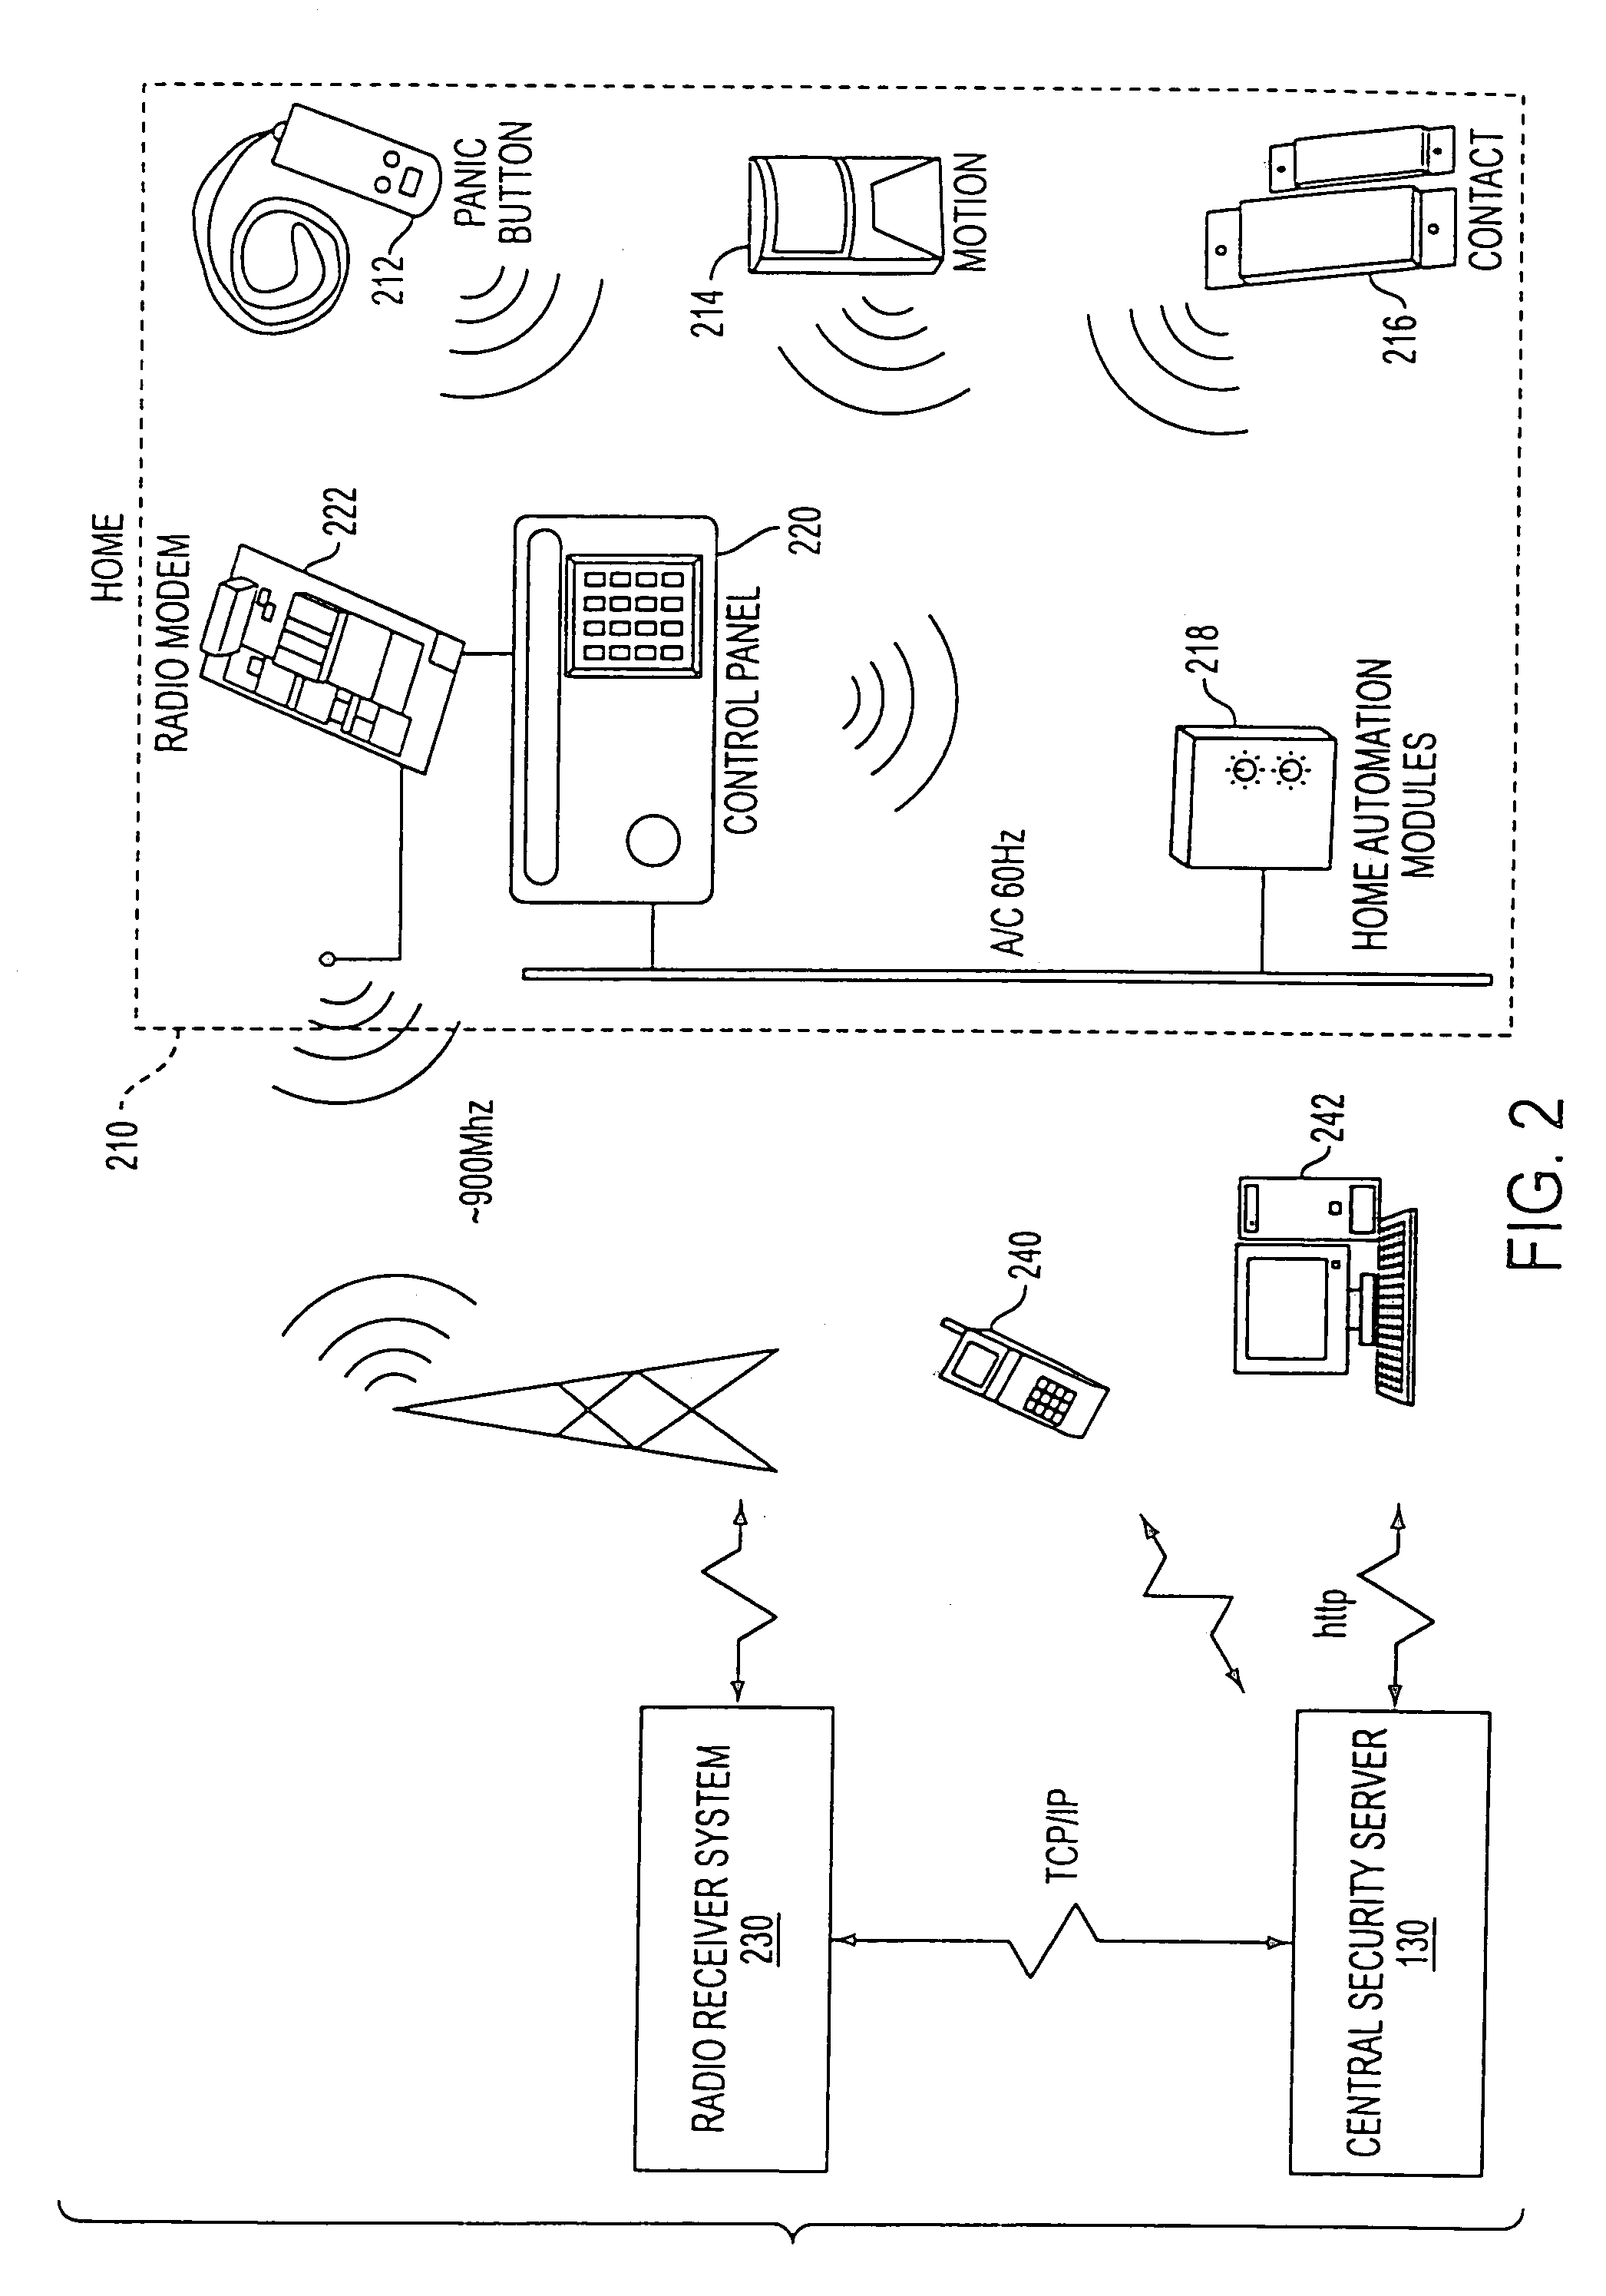 System and method for connecting security systems to a wireless device